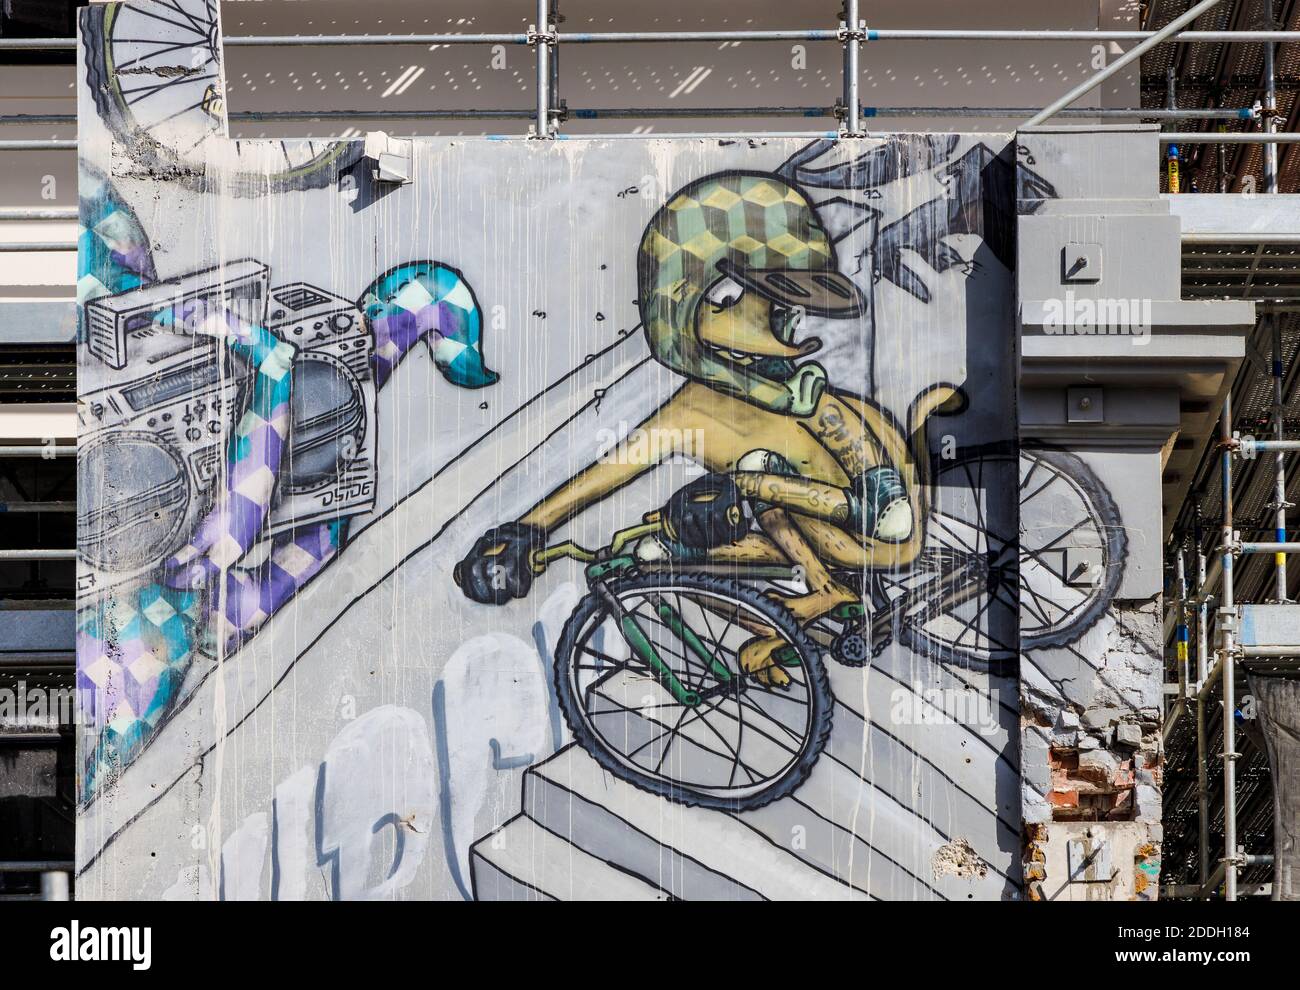 Cartoon figure on a bike. Large canvas panel partly removed during earthquake restoration work, Christchurch, New Zealand. Stock Photo